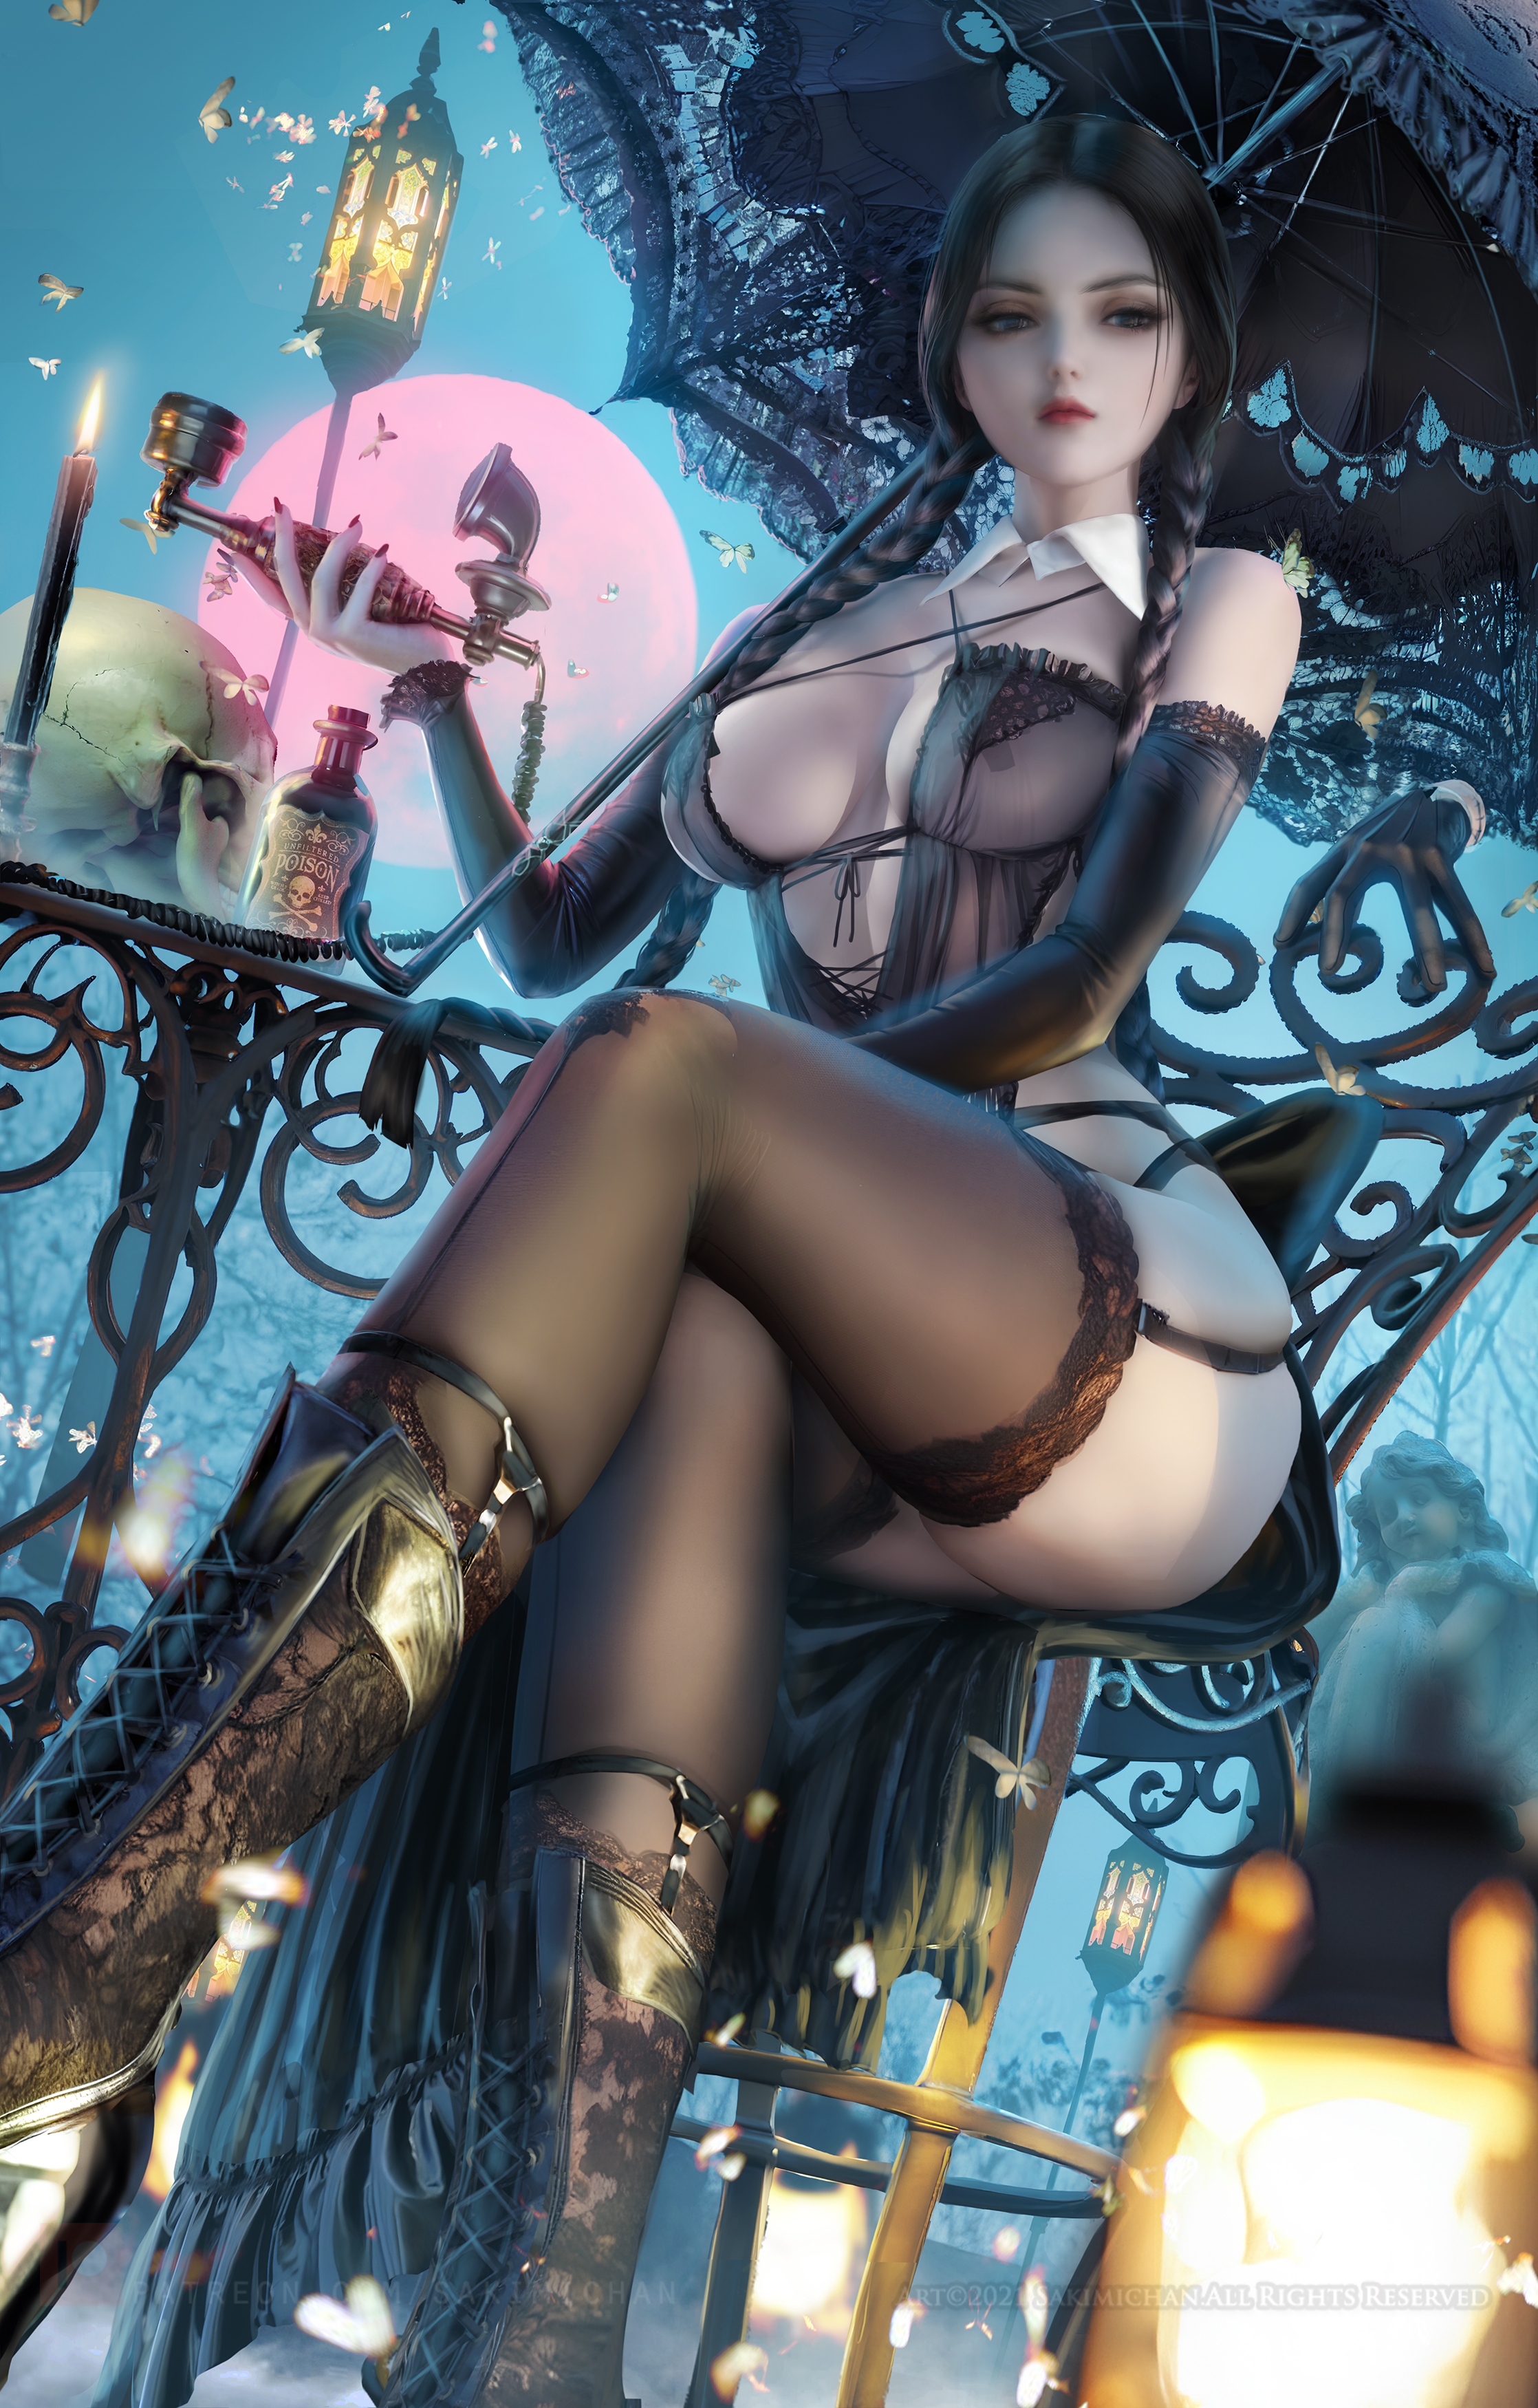 General 2236x3500 Wednesday Addams fictional character 2D artwork drawing fan art Sakimichan Gothic twintails umbrella lingerie stockings legs crossed portrait display candles braids skull big boobs low-angle boots